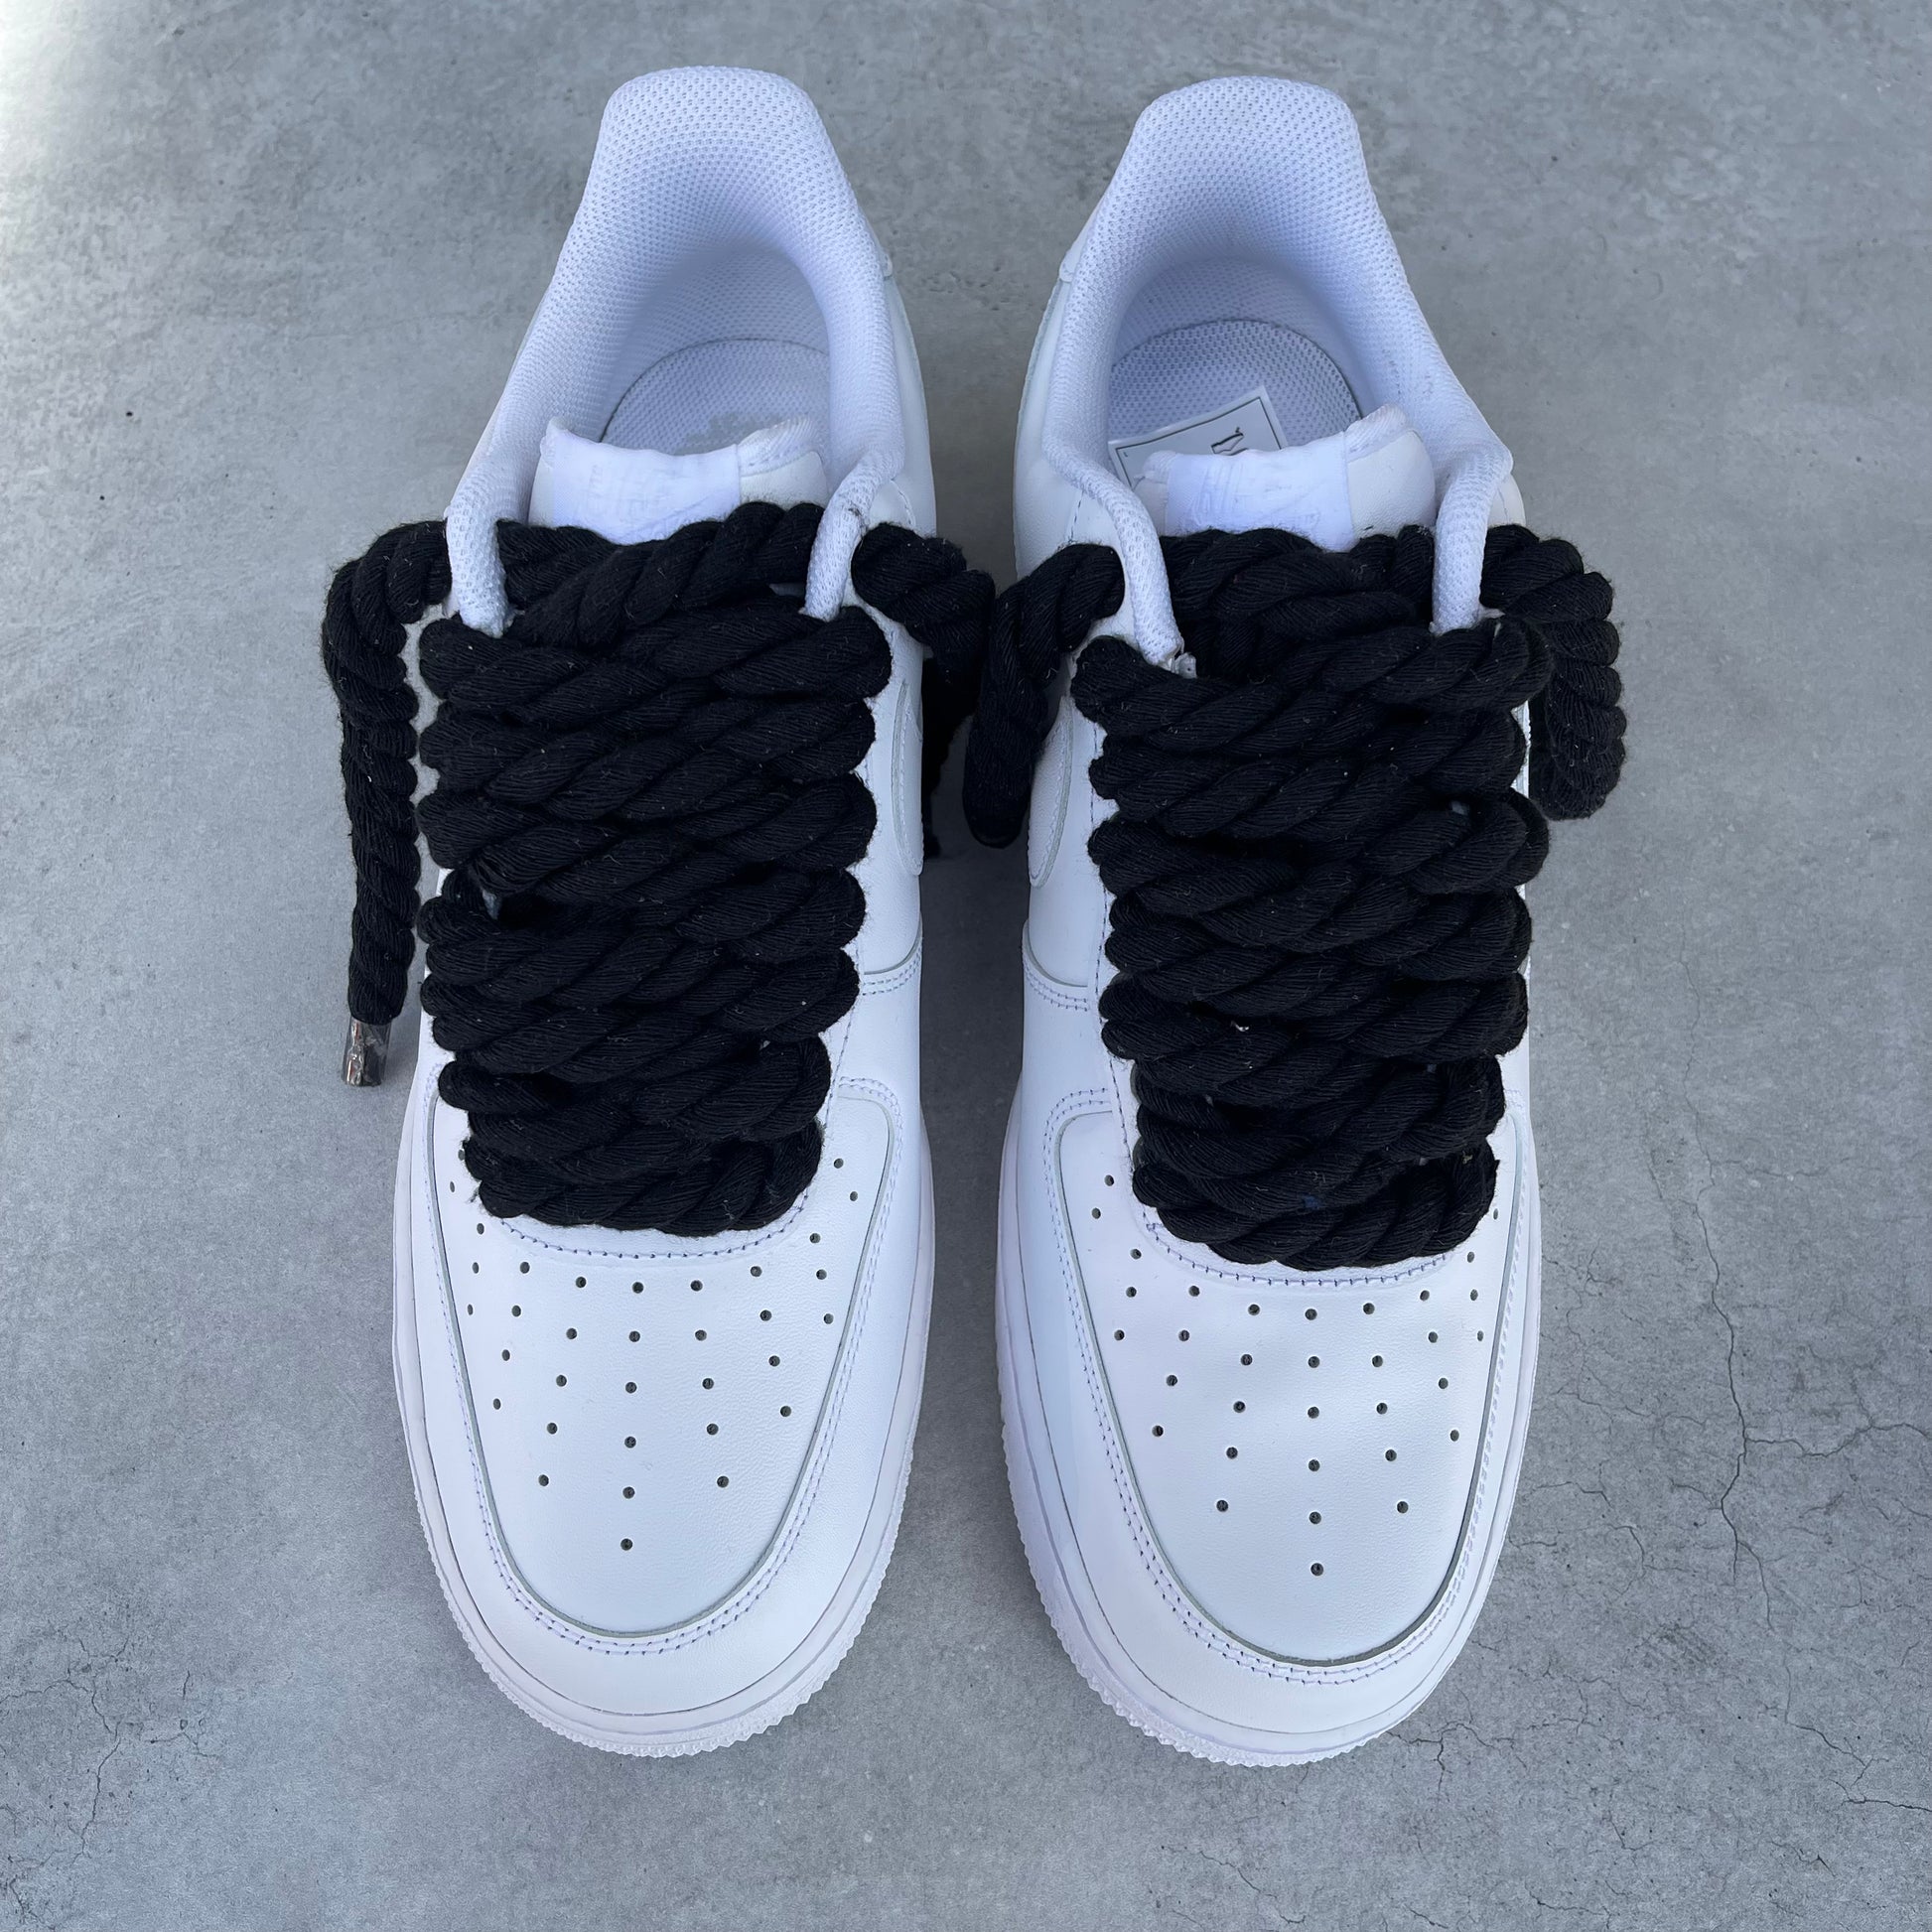 Black Air Force 1 Rope Laces 